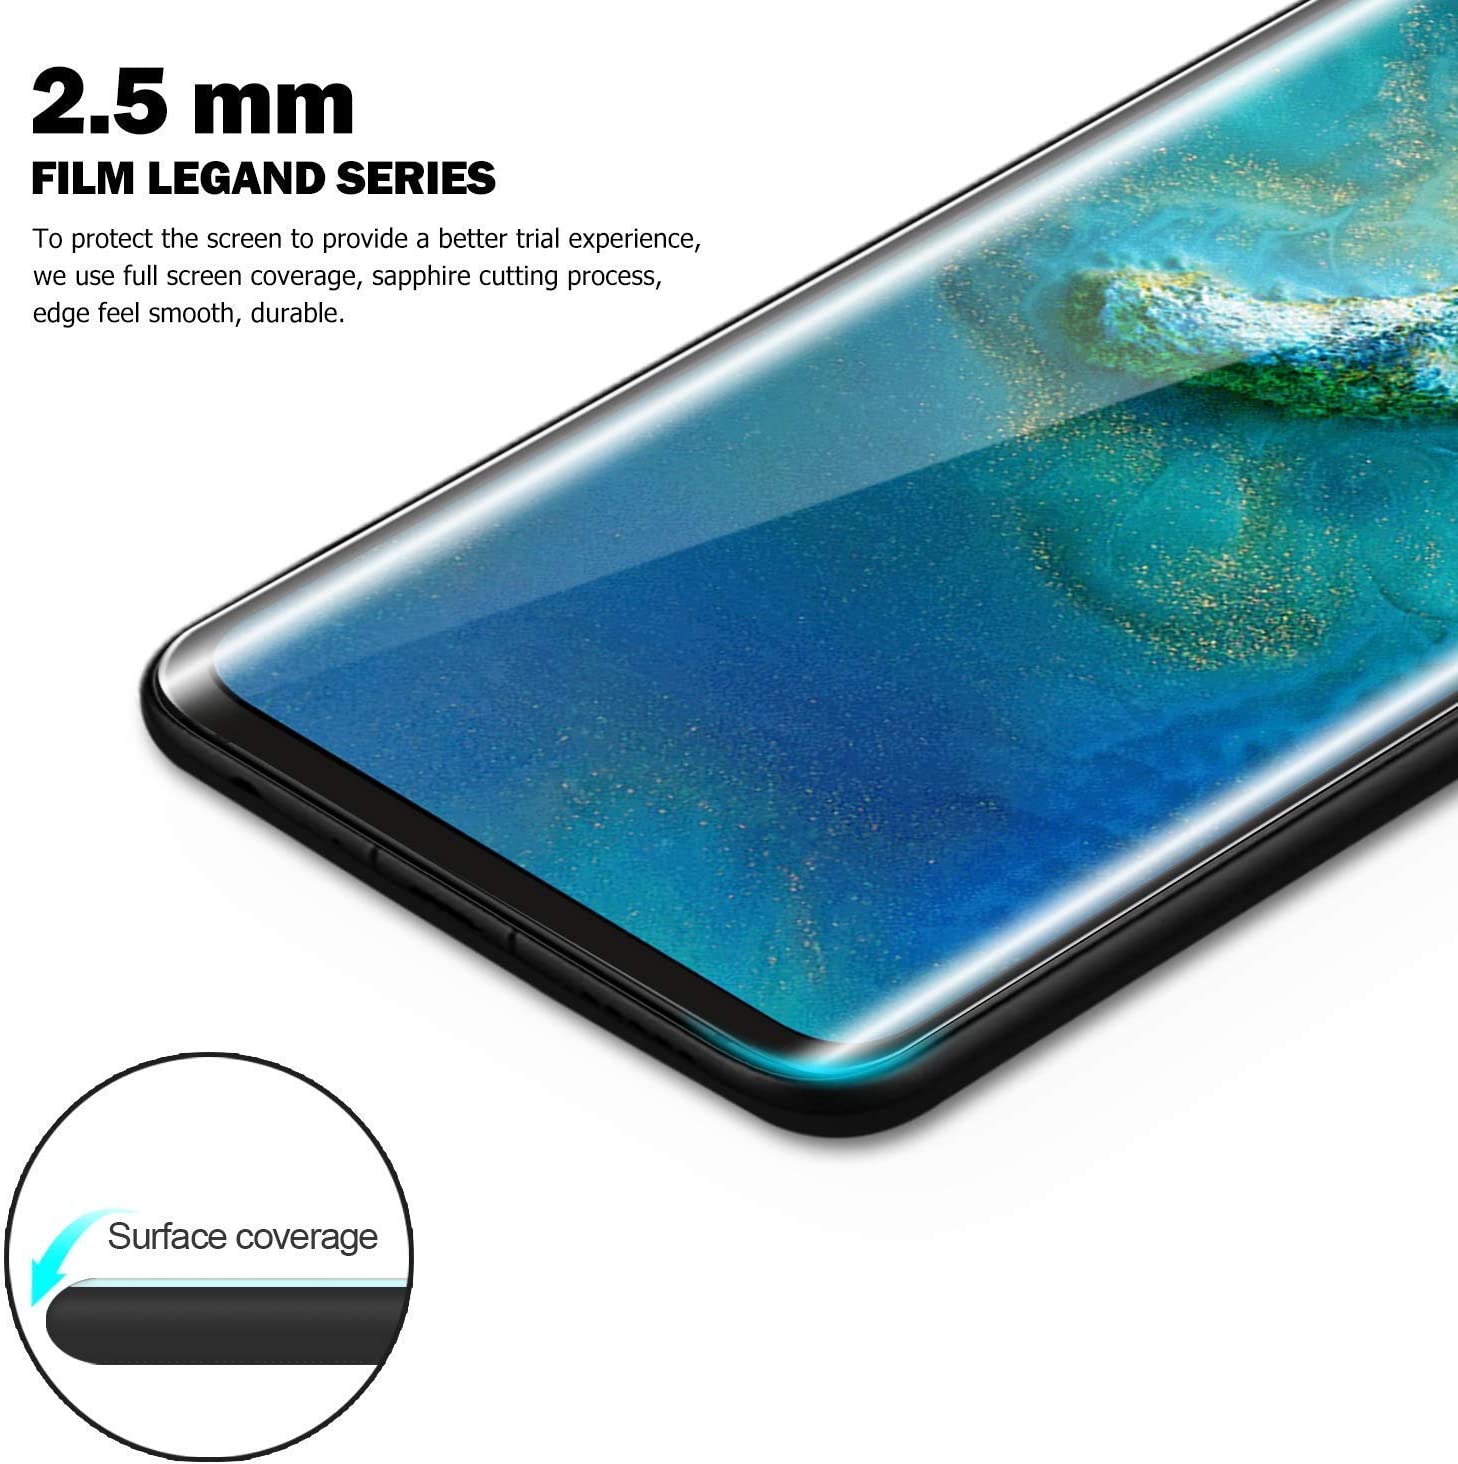 COOLWUFAN Huawei Mate 20 Pro Screen Protector 3D Tempered Glass [Full Adhesive][Case Friendly][Support Screen Fingerprint Reading] Anti-Scratch Anti Bubbles Film compatible for Huawei Mate 20 Pro